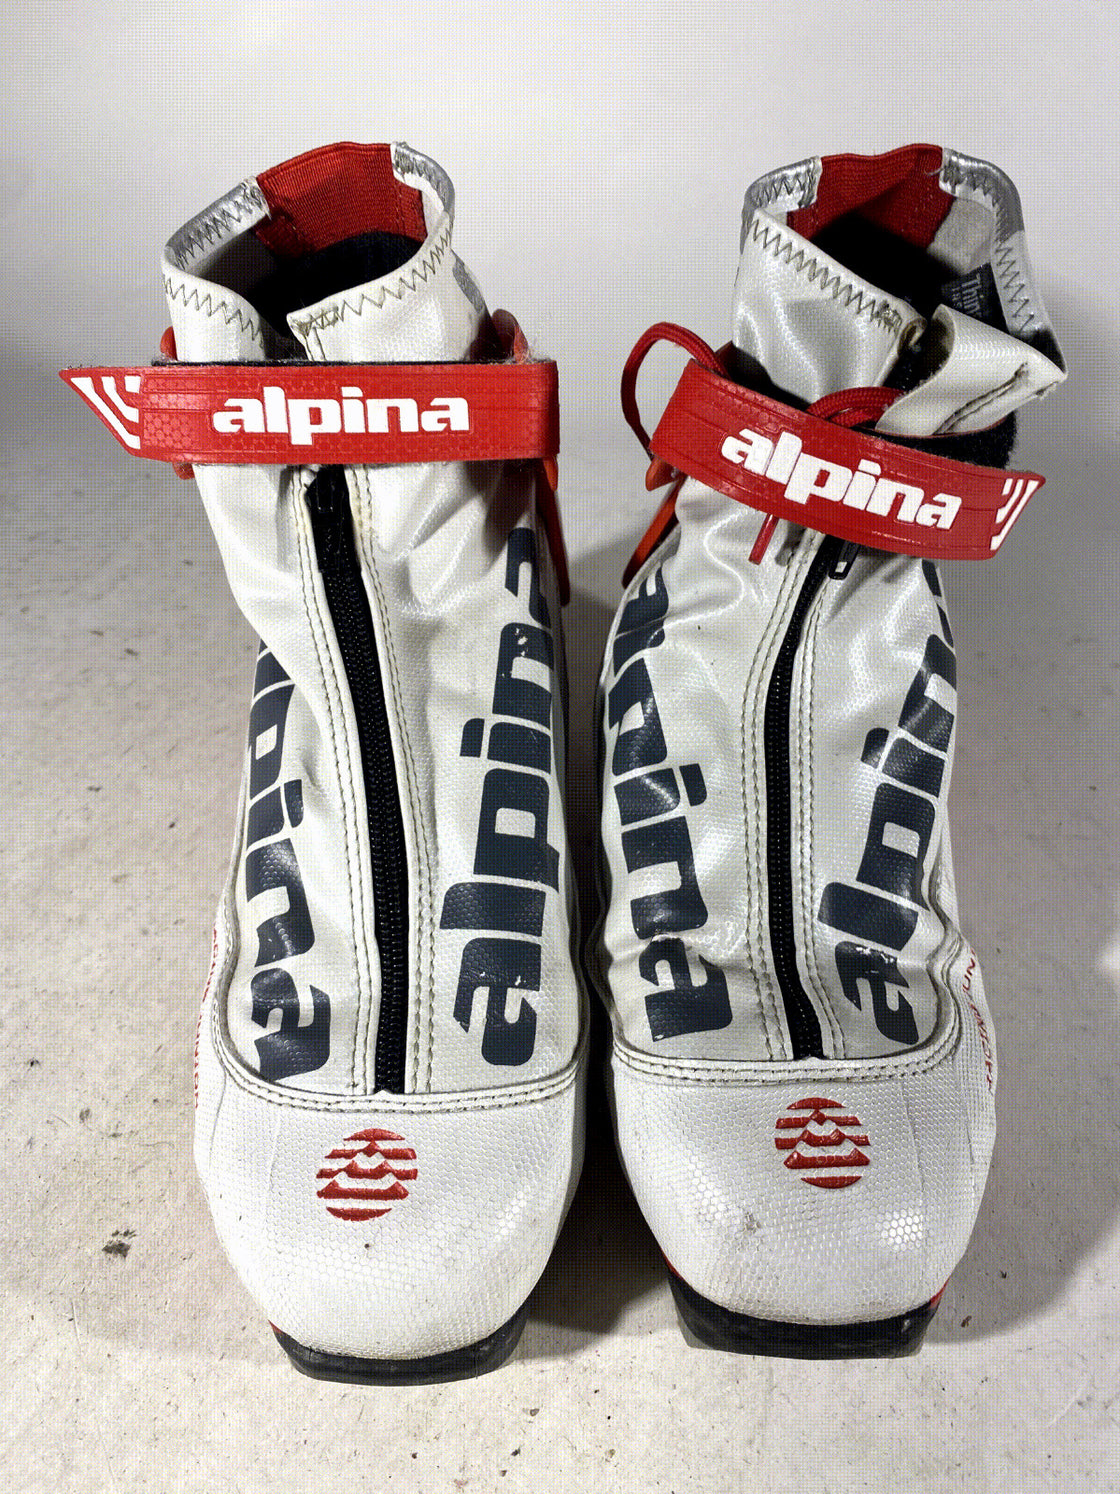 Alpina R Combi Nordic Cross Country Ski Boots Size EU40 US7.5 for NNN